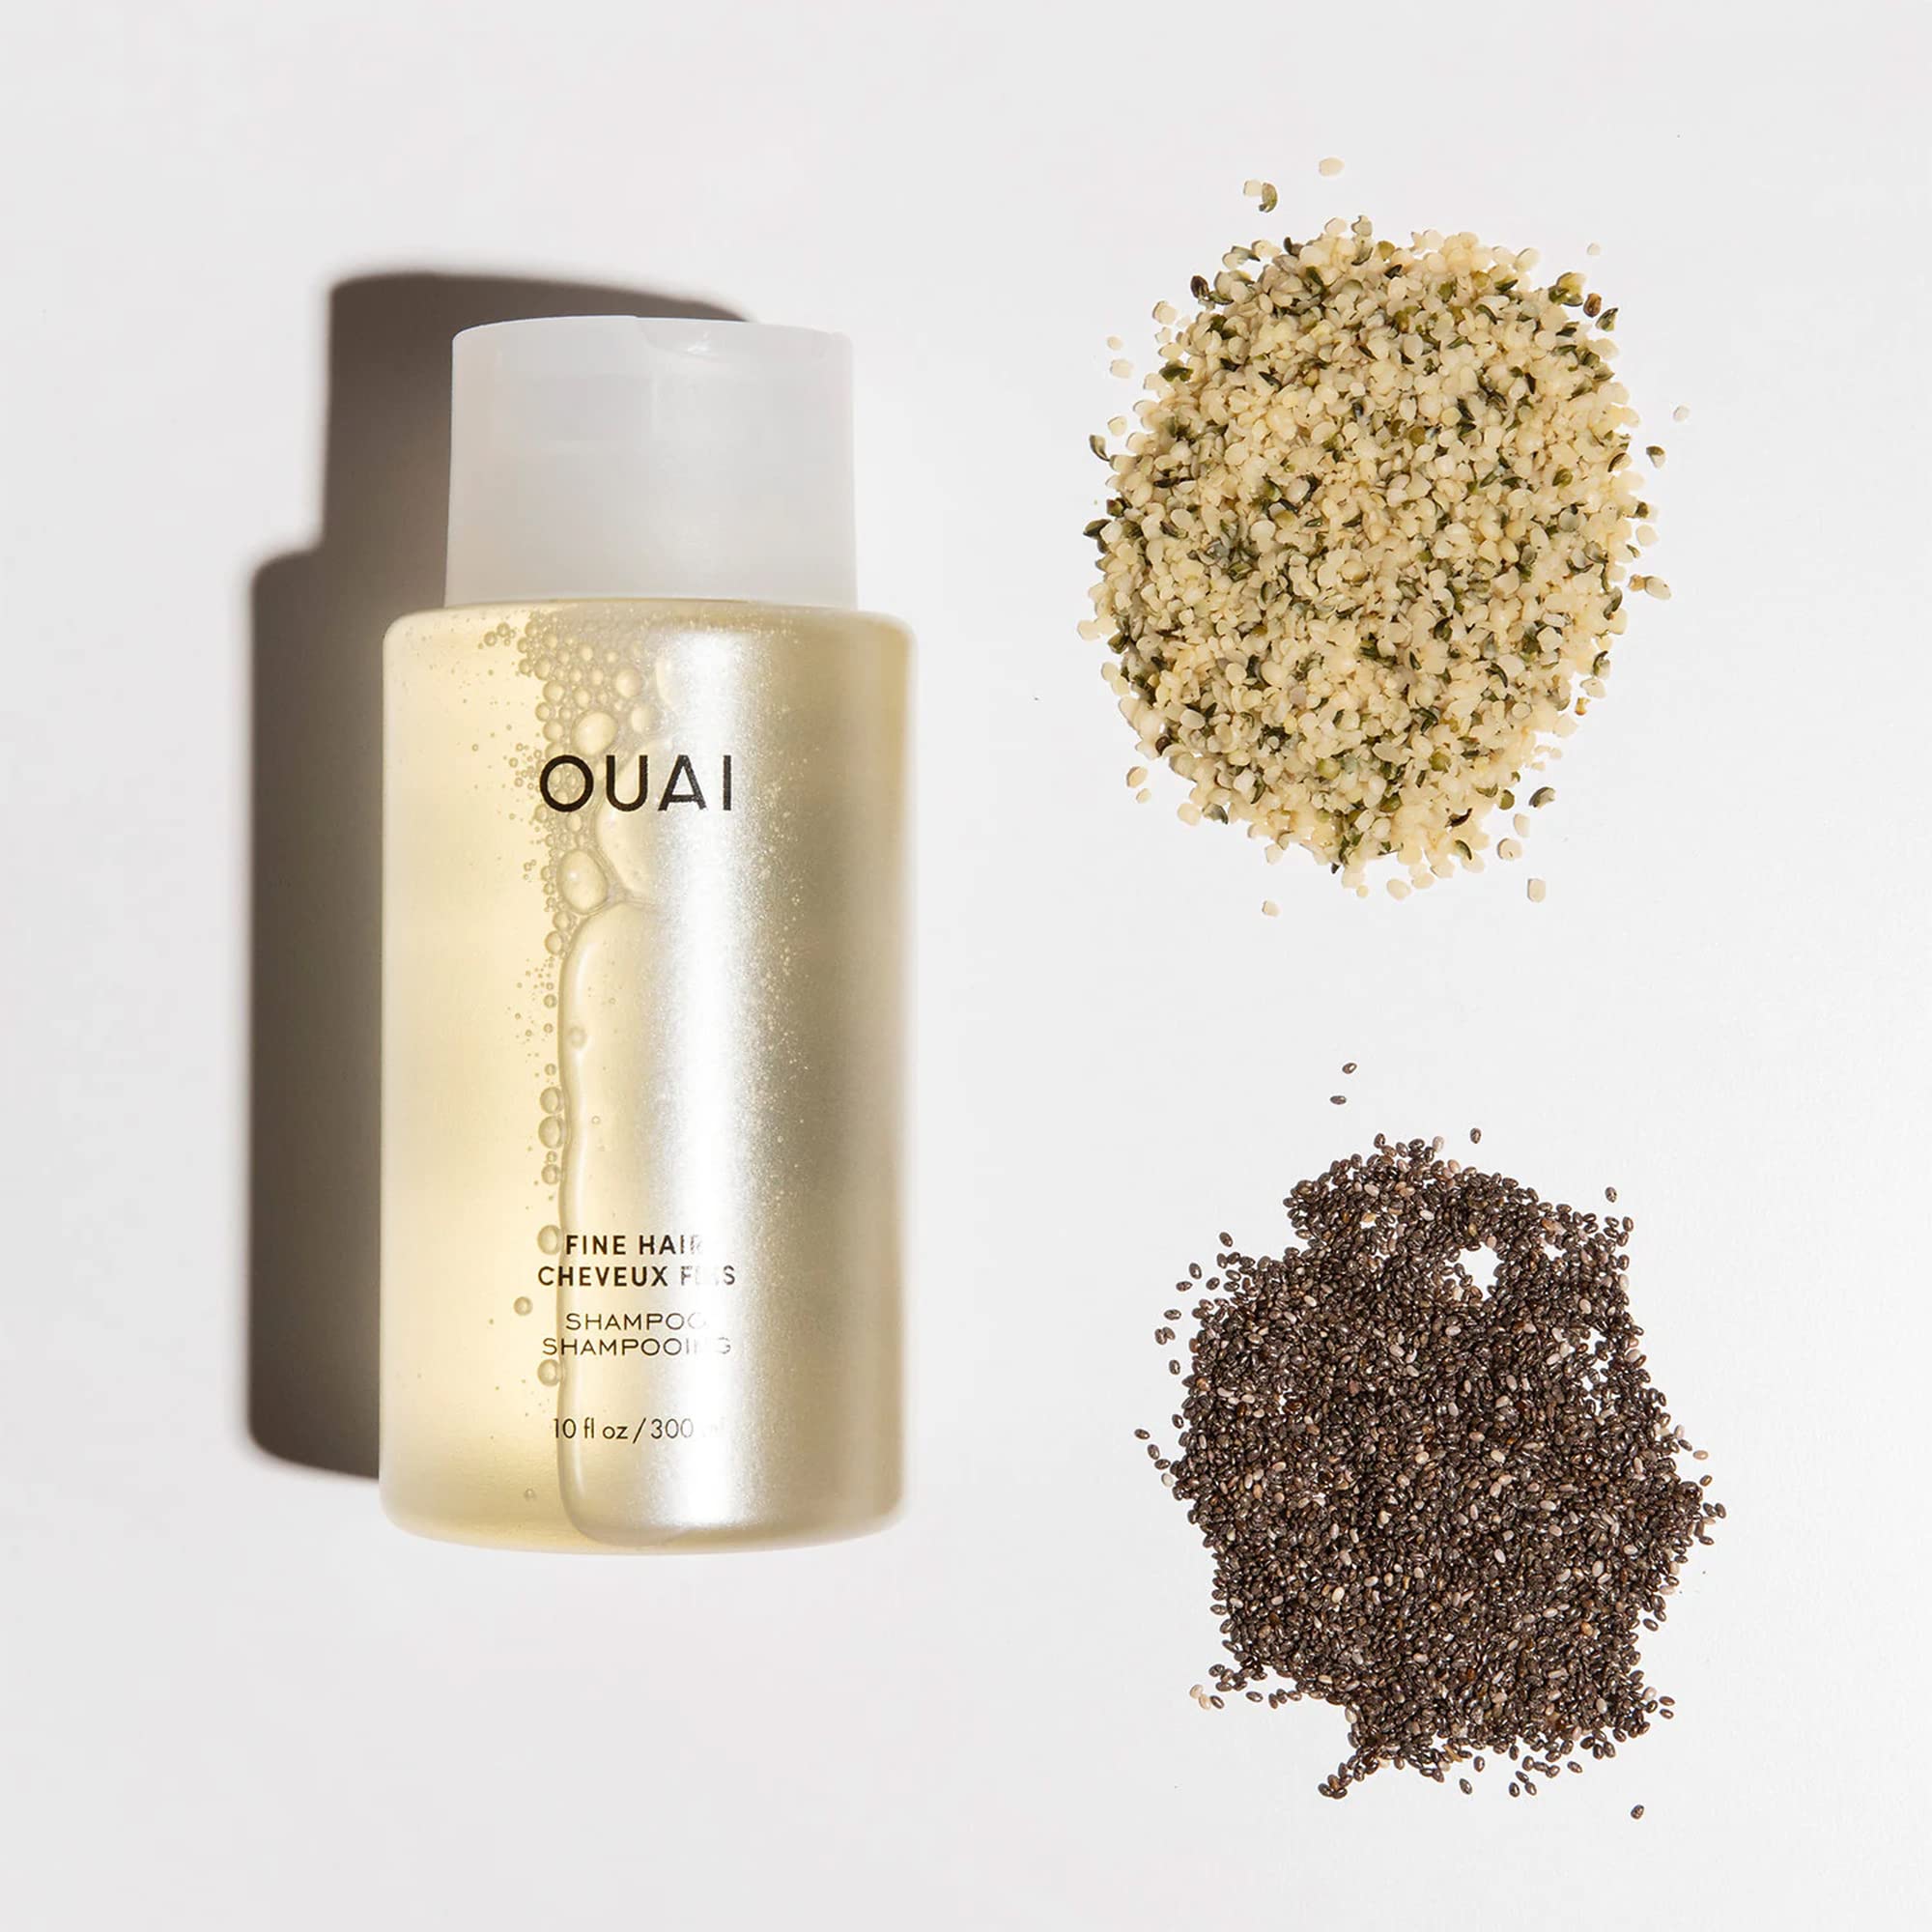 OUAI Fine Shampoo - Bring Fine Hair to the Next Level with Strengthening Keratin, Biotin & Chia Seed Oil - Delivers Clean, Bouncy & Voluminous Hair - Free of Parabens, Sulfates & Phthalates - 10 fl oz